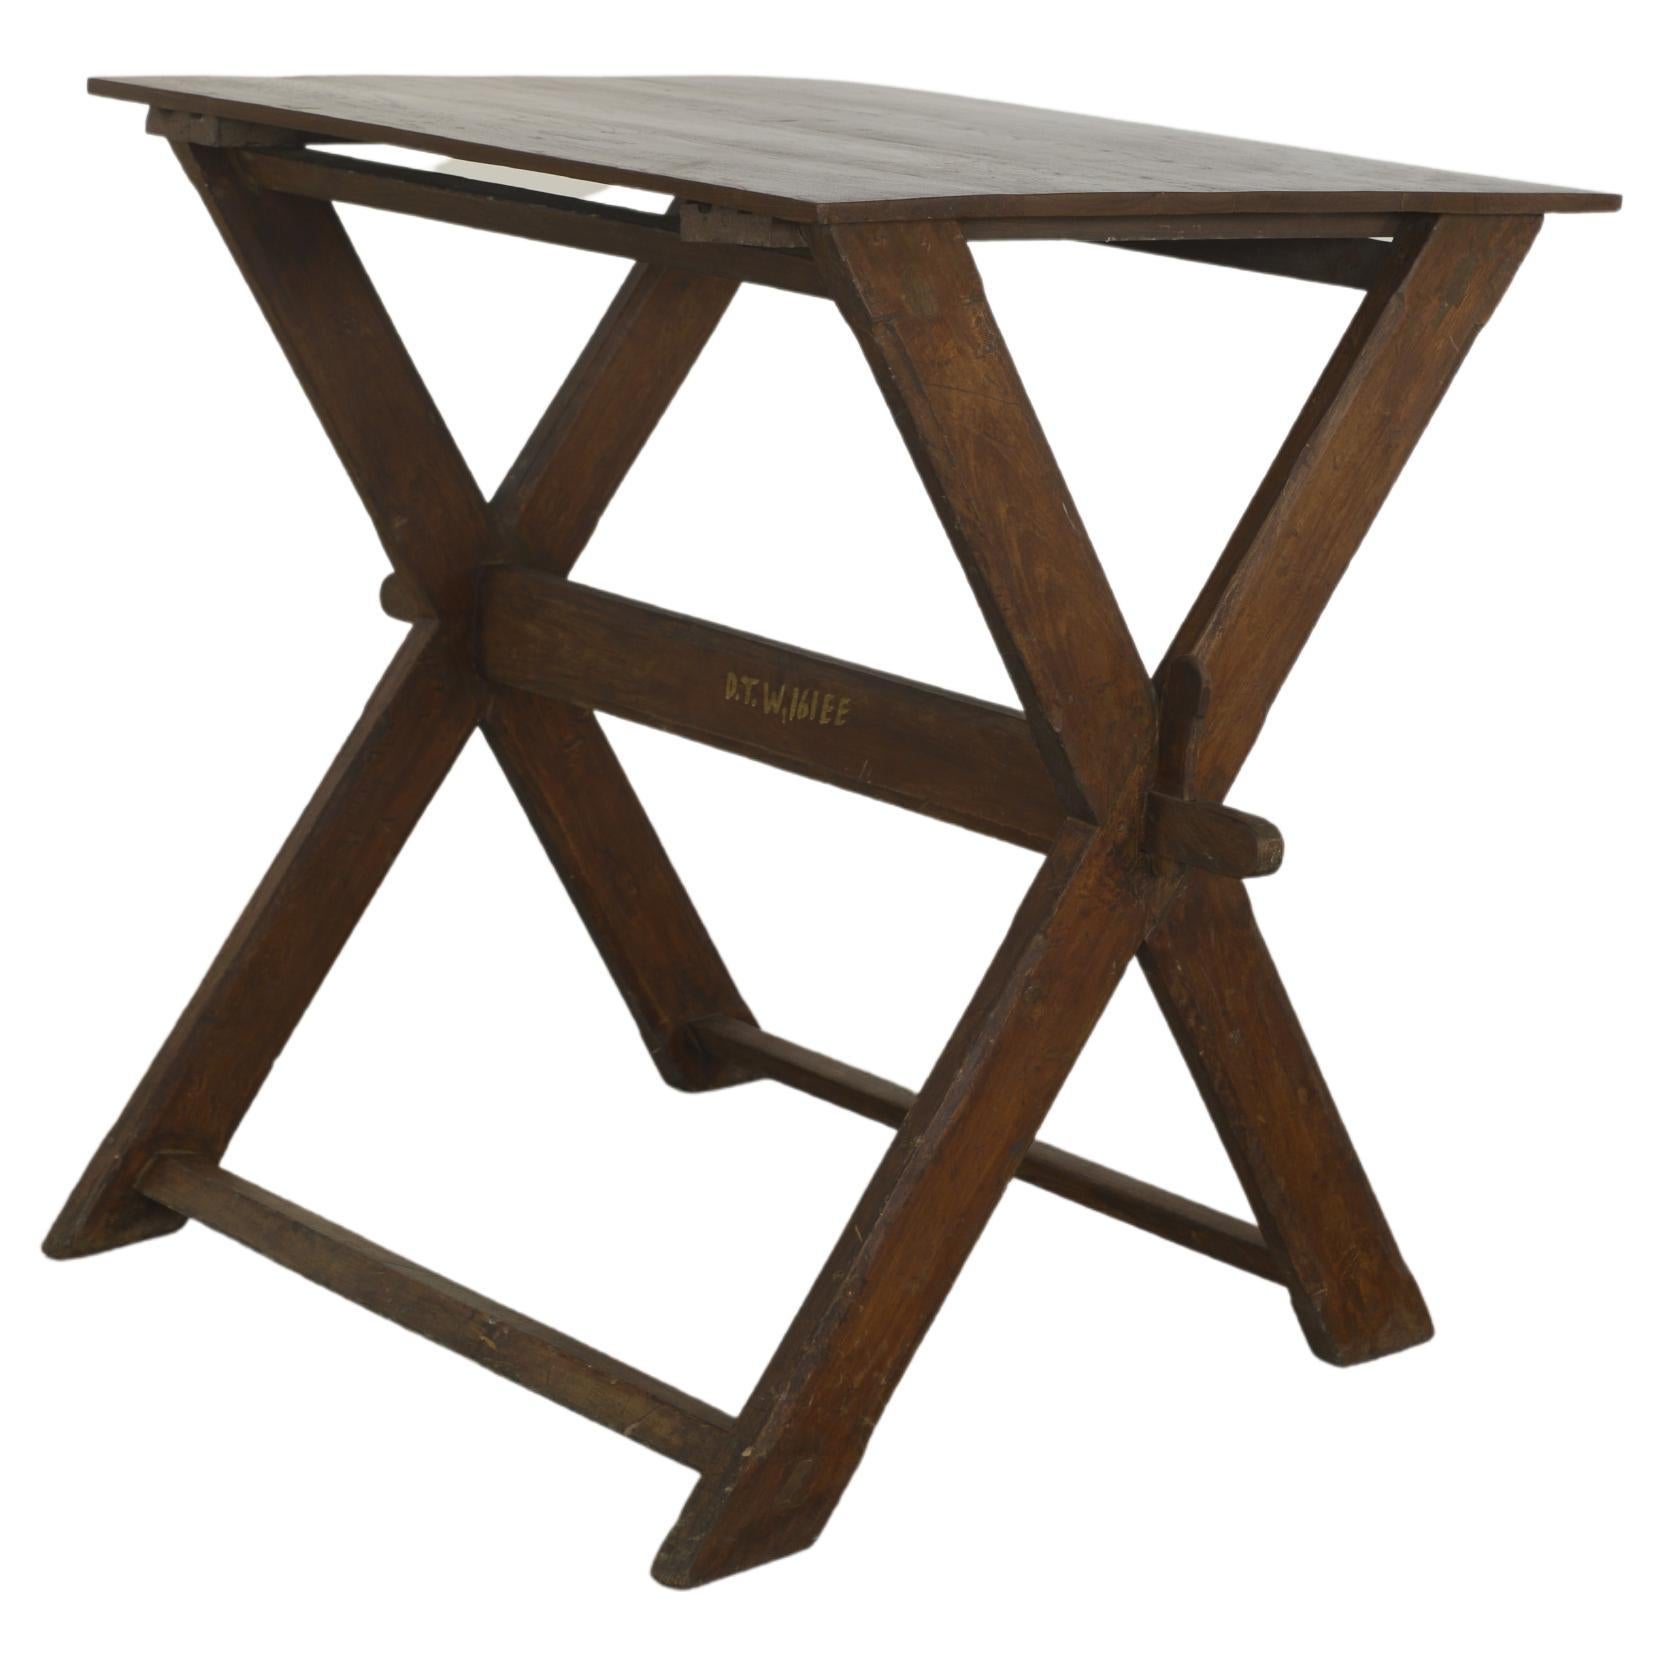 Pierre Jeanneret PJ-TA-11-A Collapsible Work Table / Authentic Mid-Century For Sale